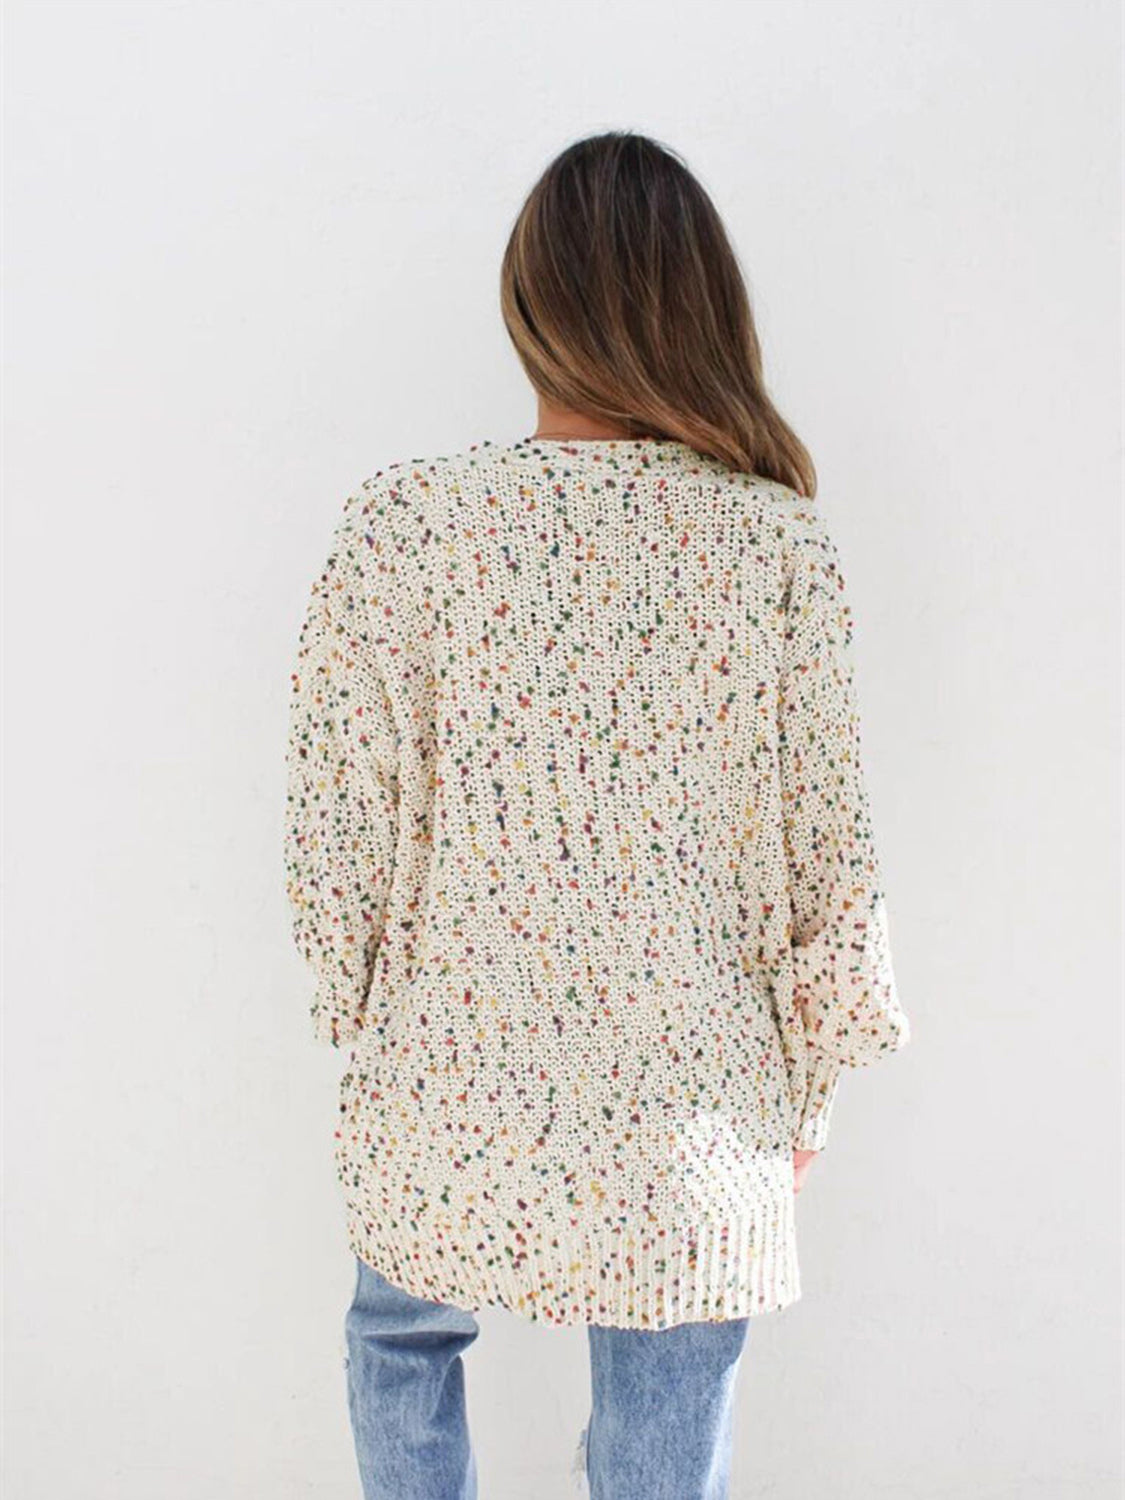 Multicolored Open Front Cardigan